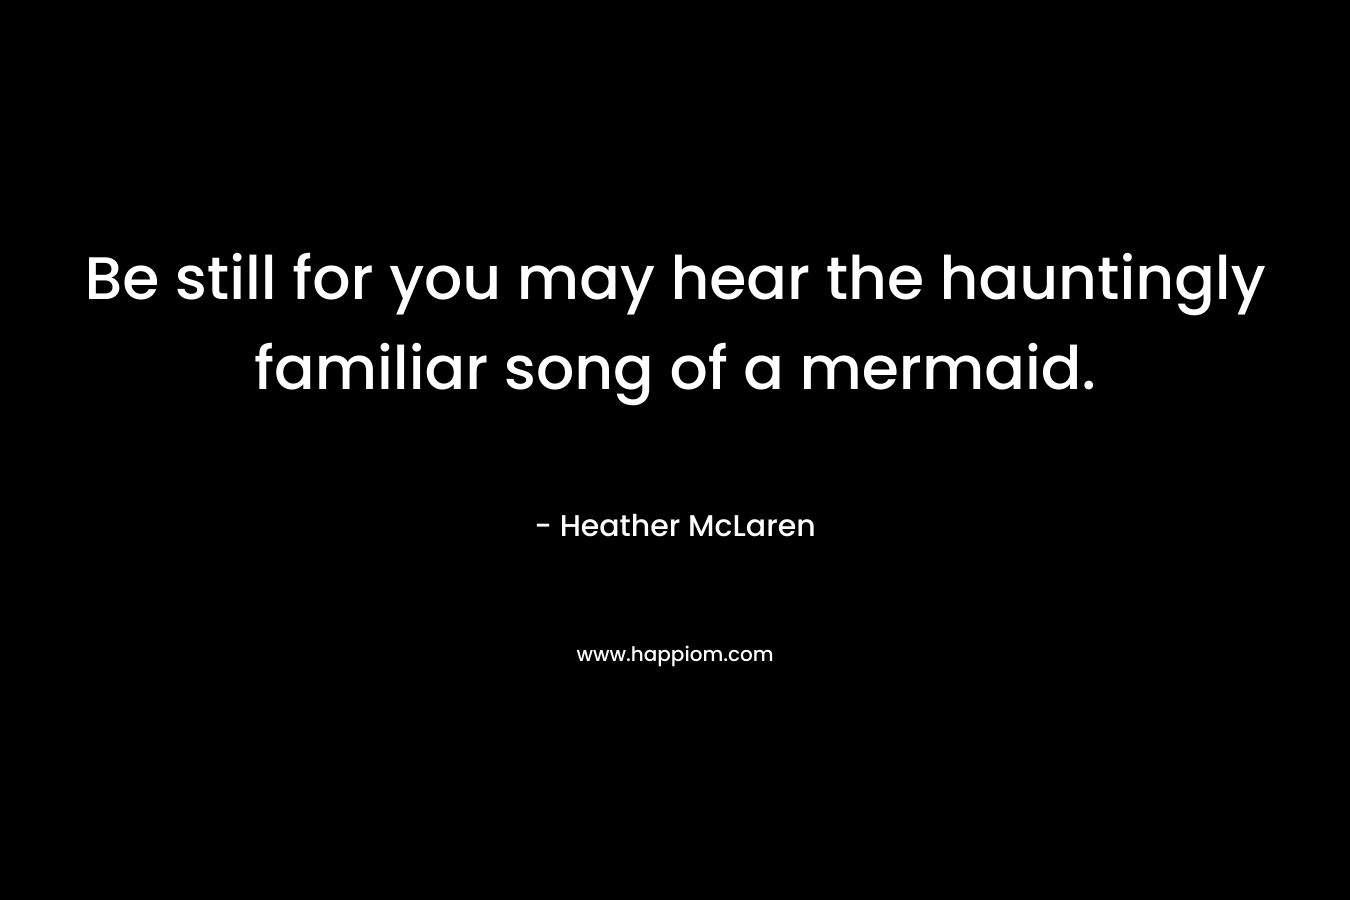 Be still for you may hear the hauntingly familiar song of a mermaid. – Heather McLaren